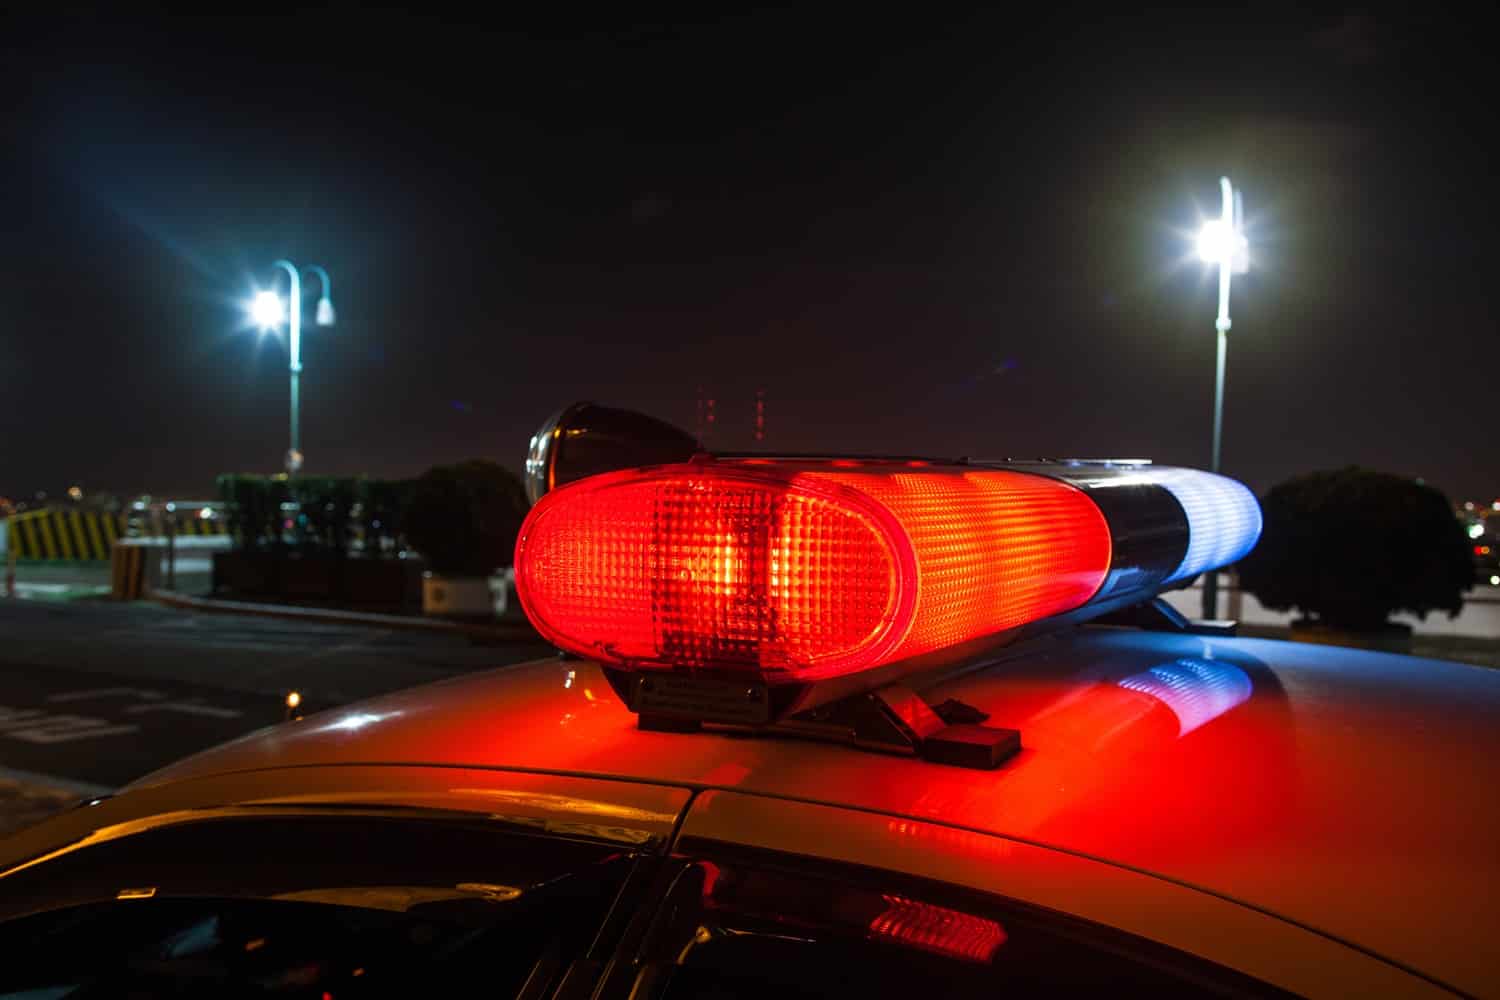 The roof of a police car at night, with its lights flashing.